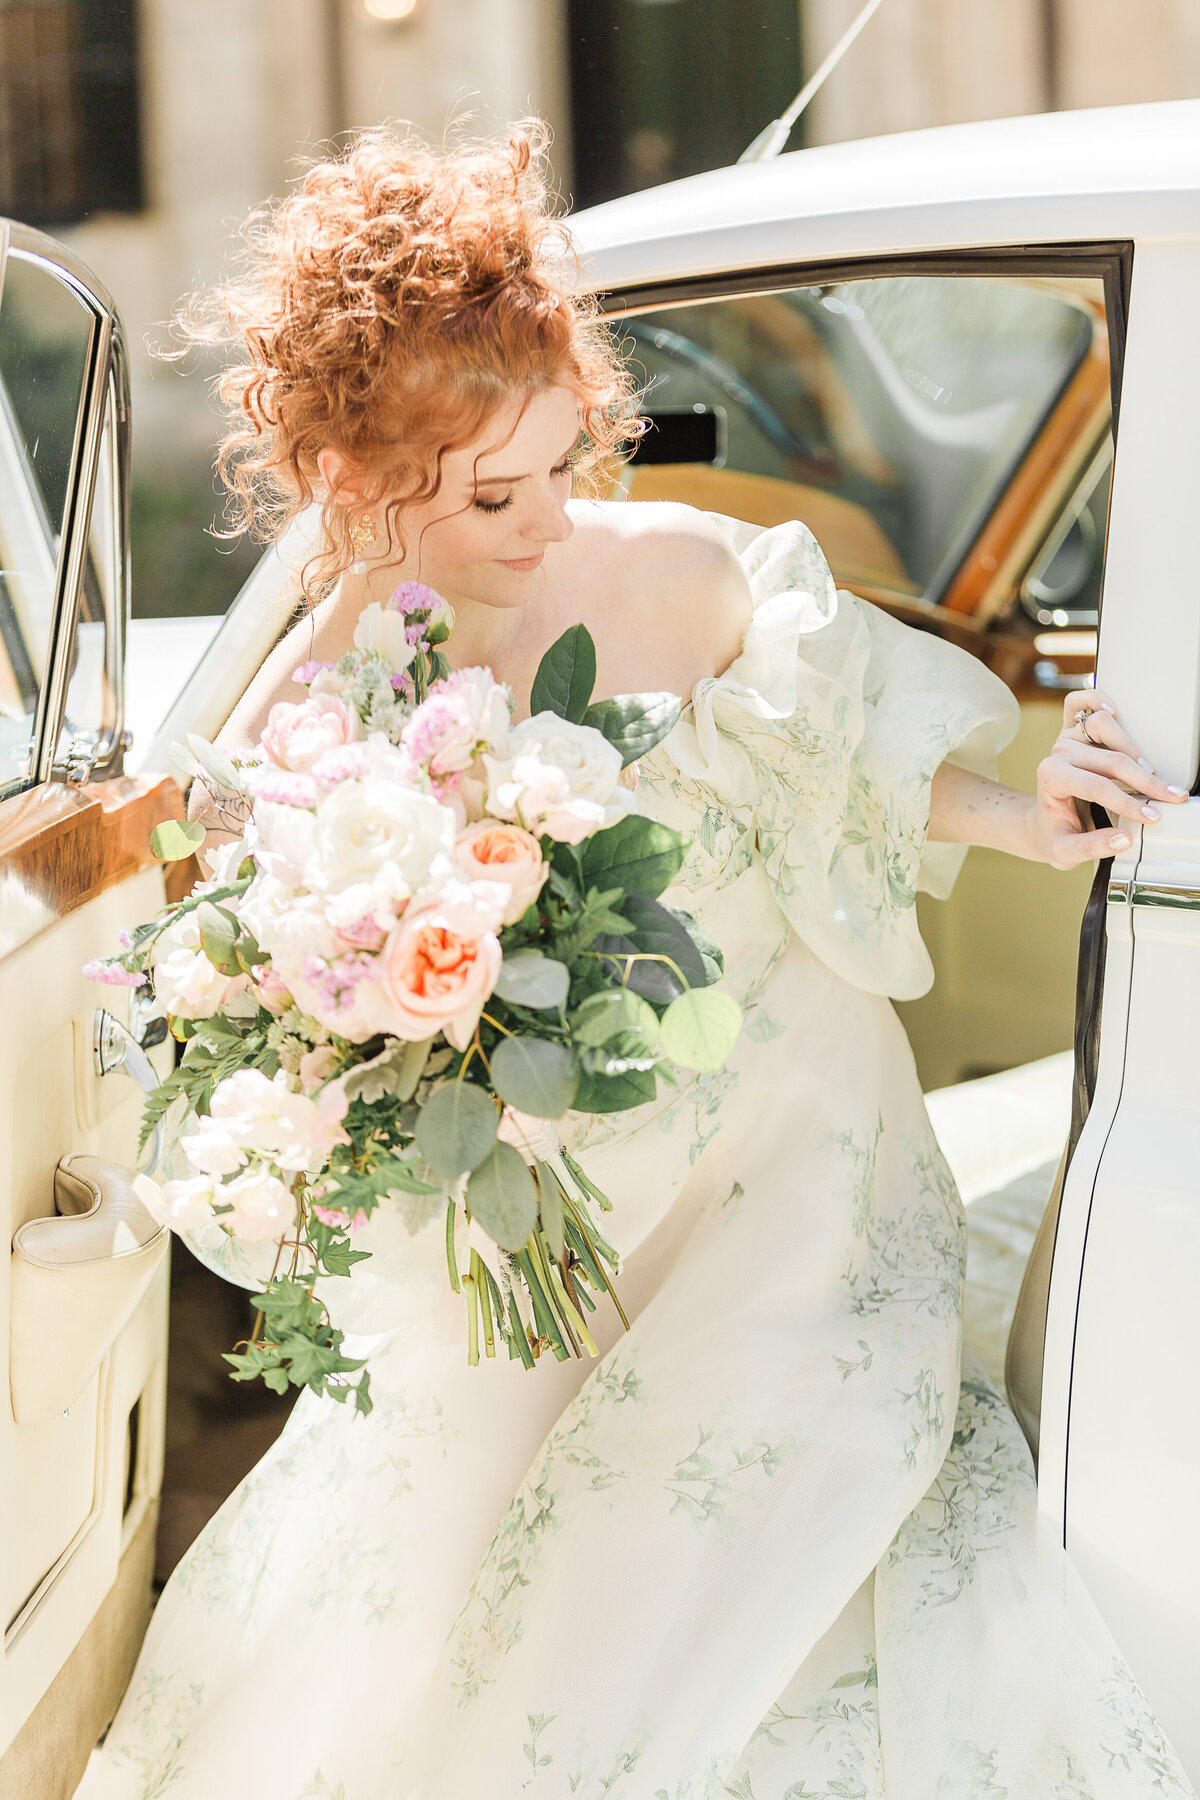 Bride with upswept curly red hair is gracefully getting out of a vintage rolls royce on her wedding day. Image captured by top New England and Destination Wedding Photographer Lia Rose Weddings.